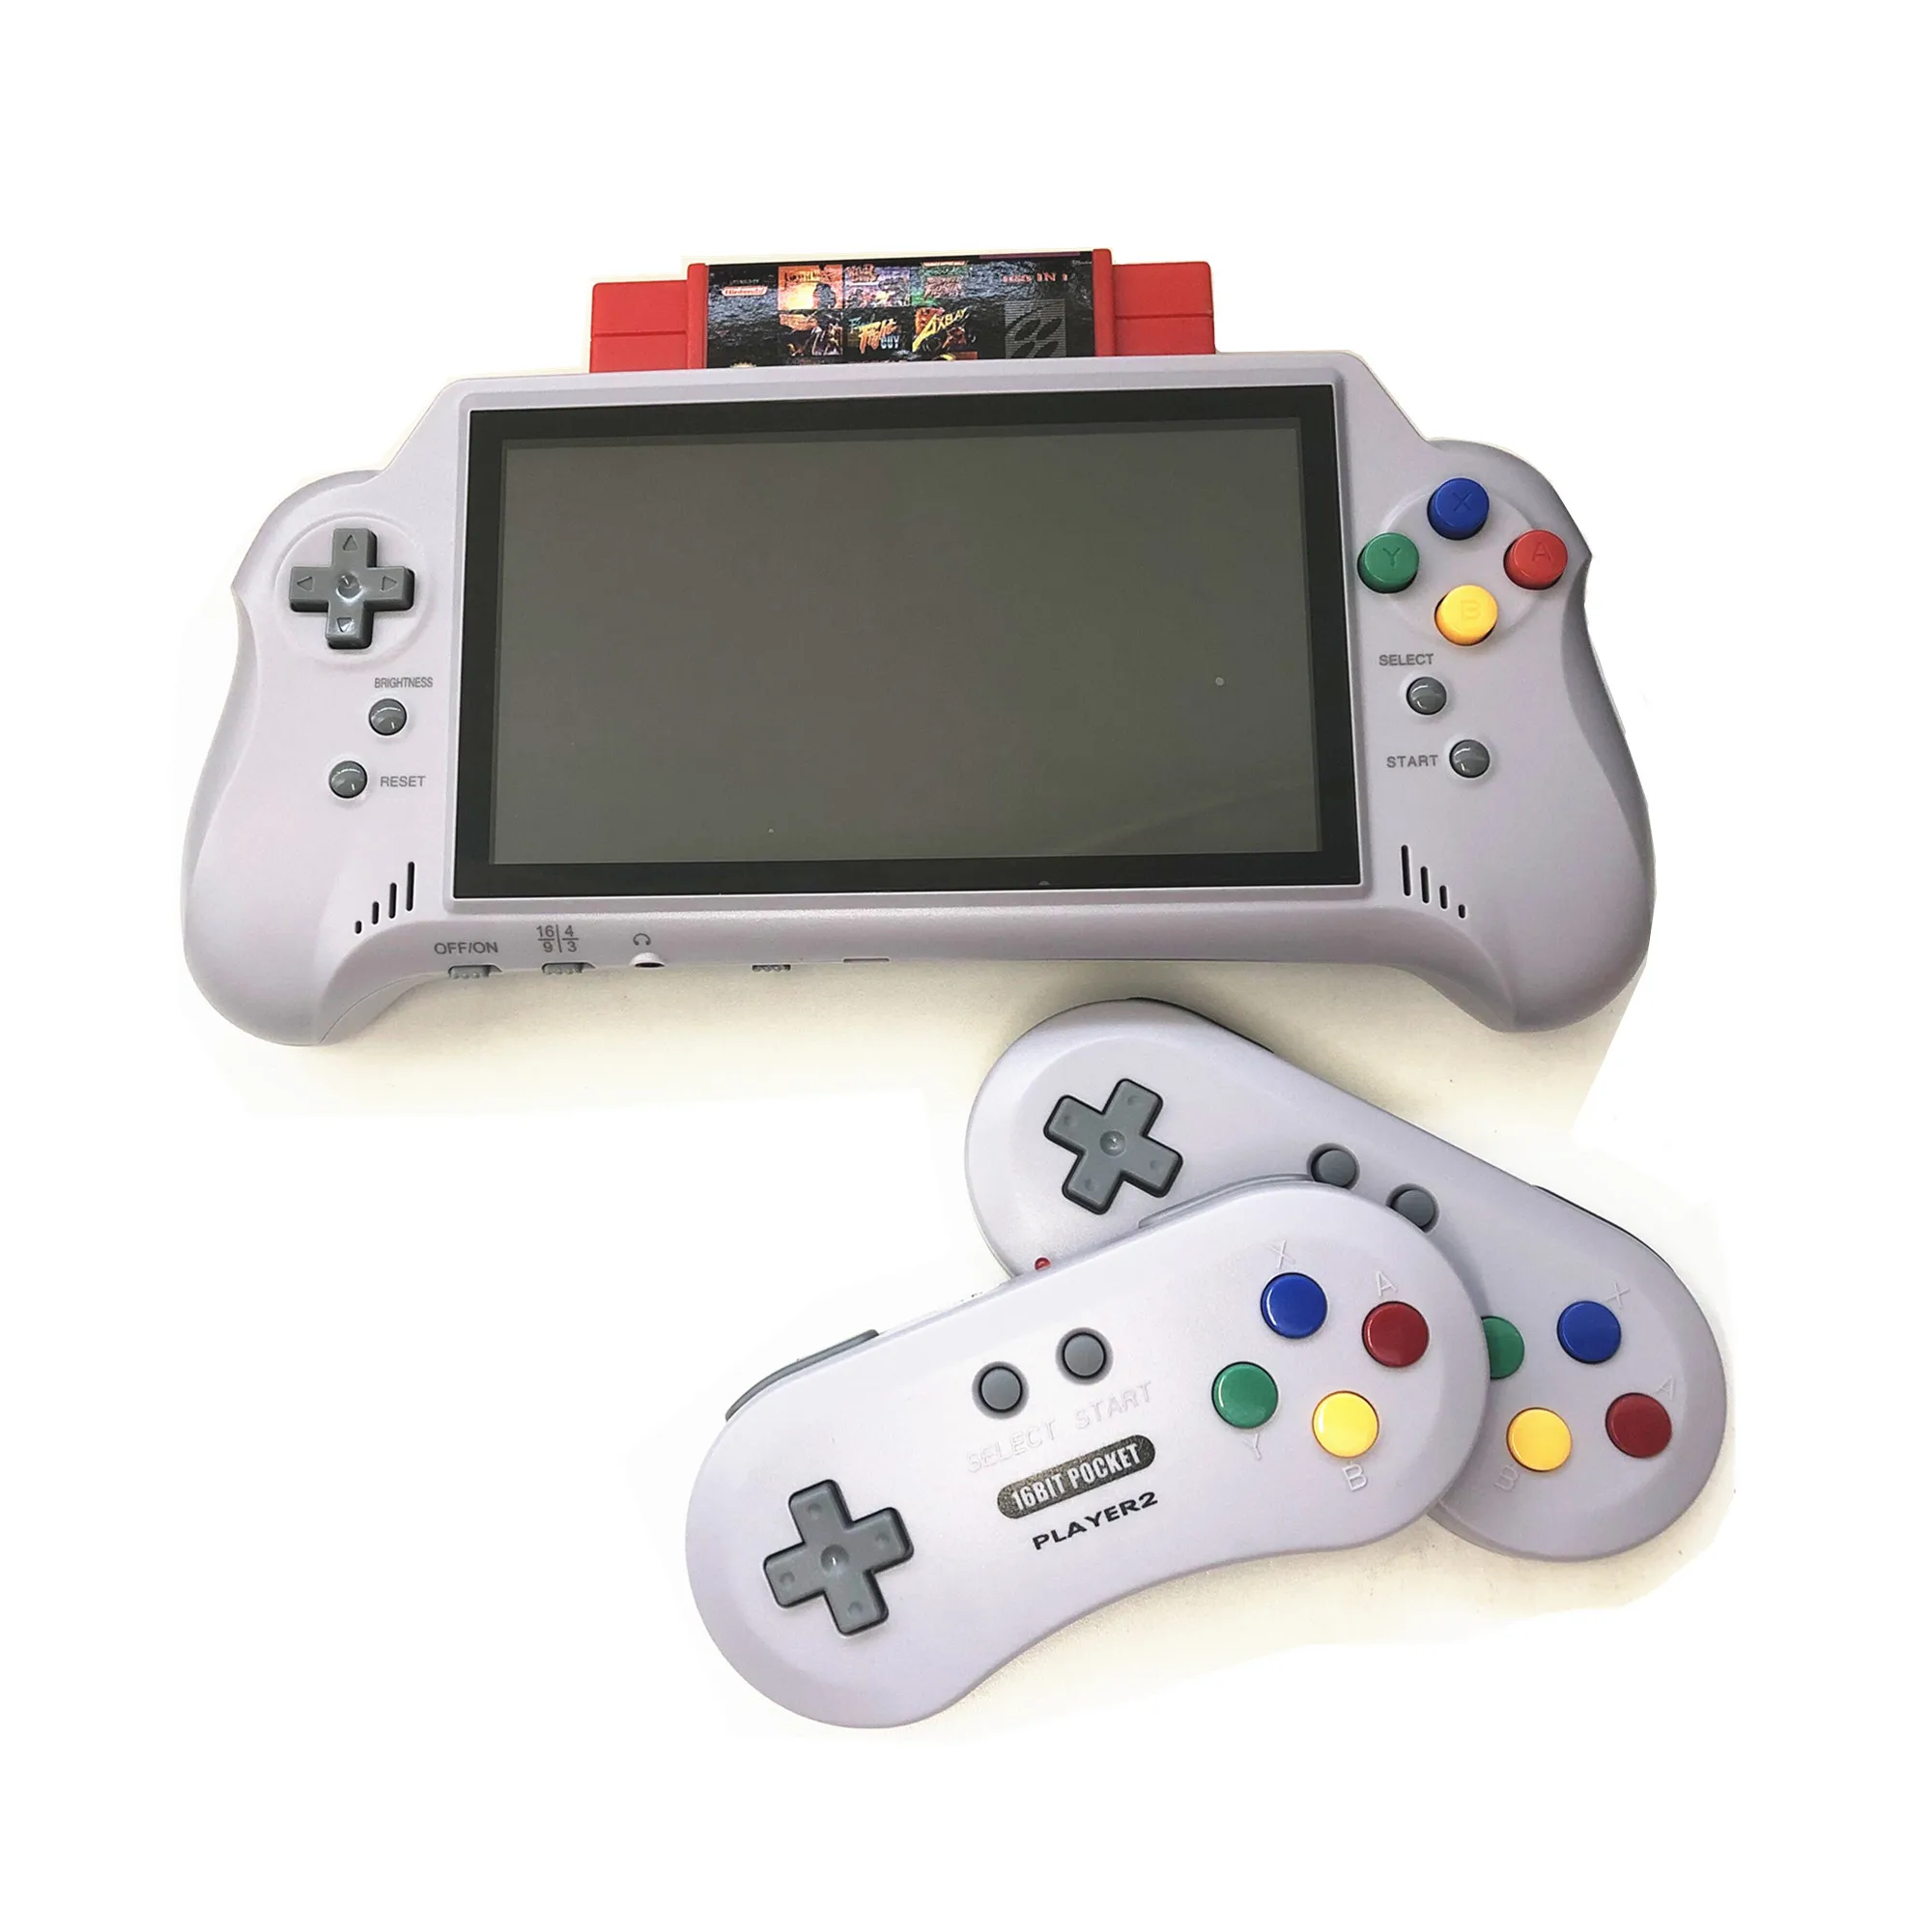 NEW ERQI NEW2022 New HD 7 inch handheld game console 16BIT HDMI ULTRA SNES POCKET RETROAD 5PLUS 2.4G Wireless controllers